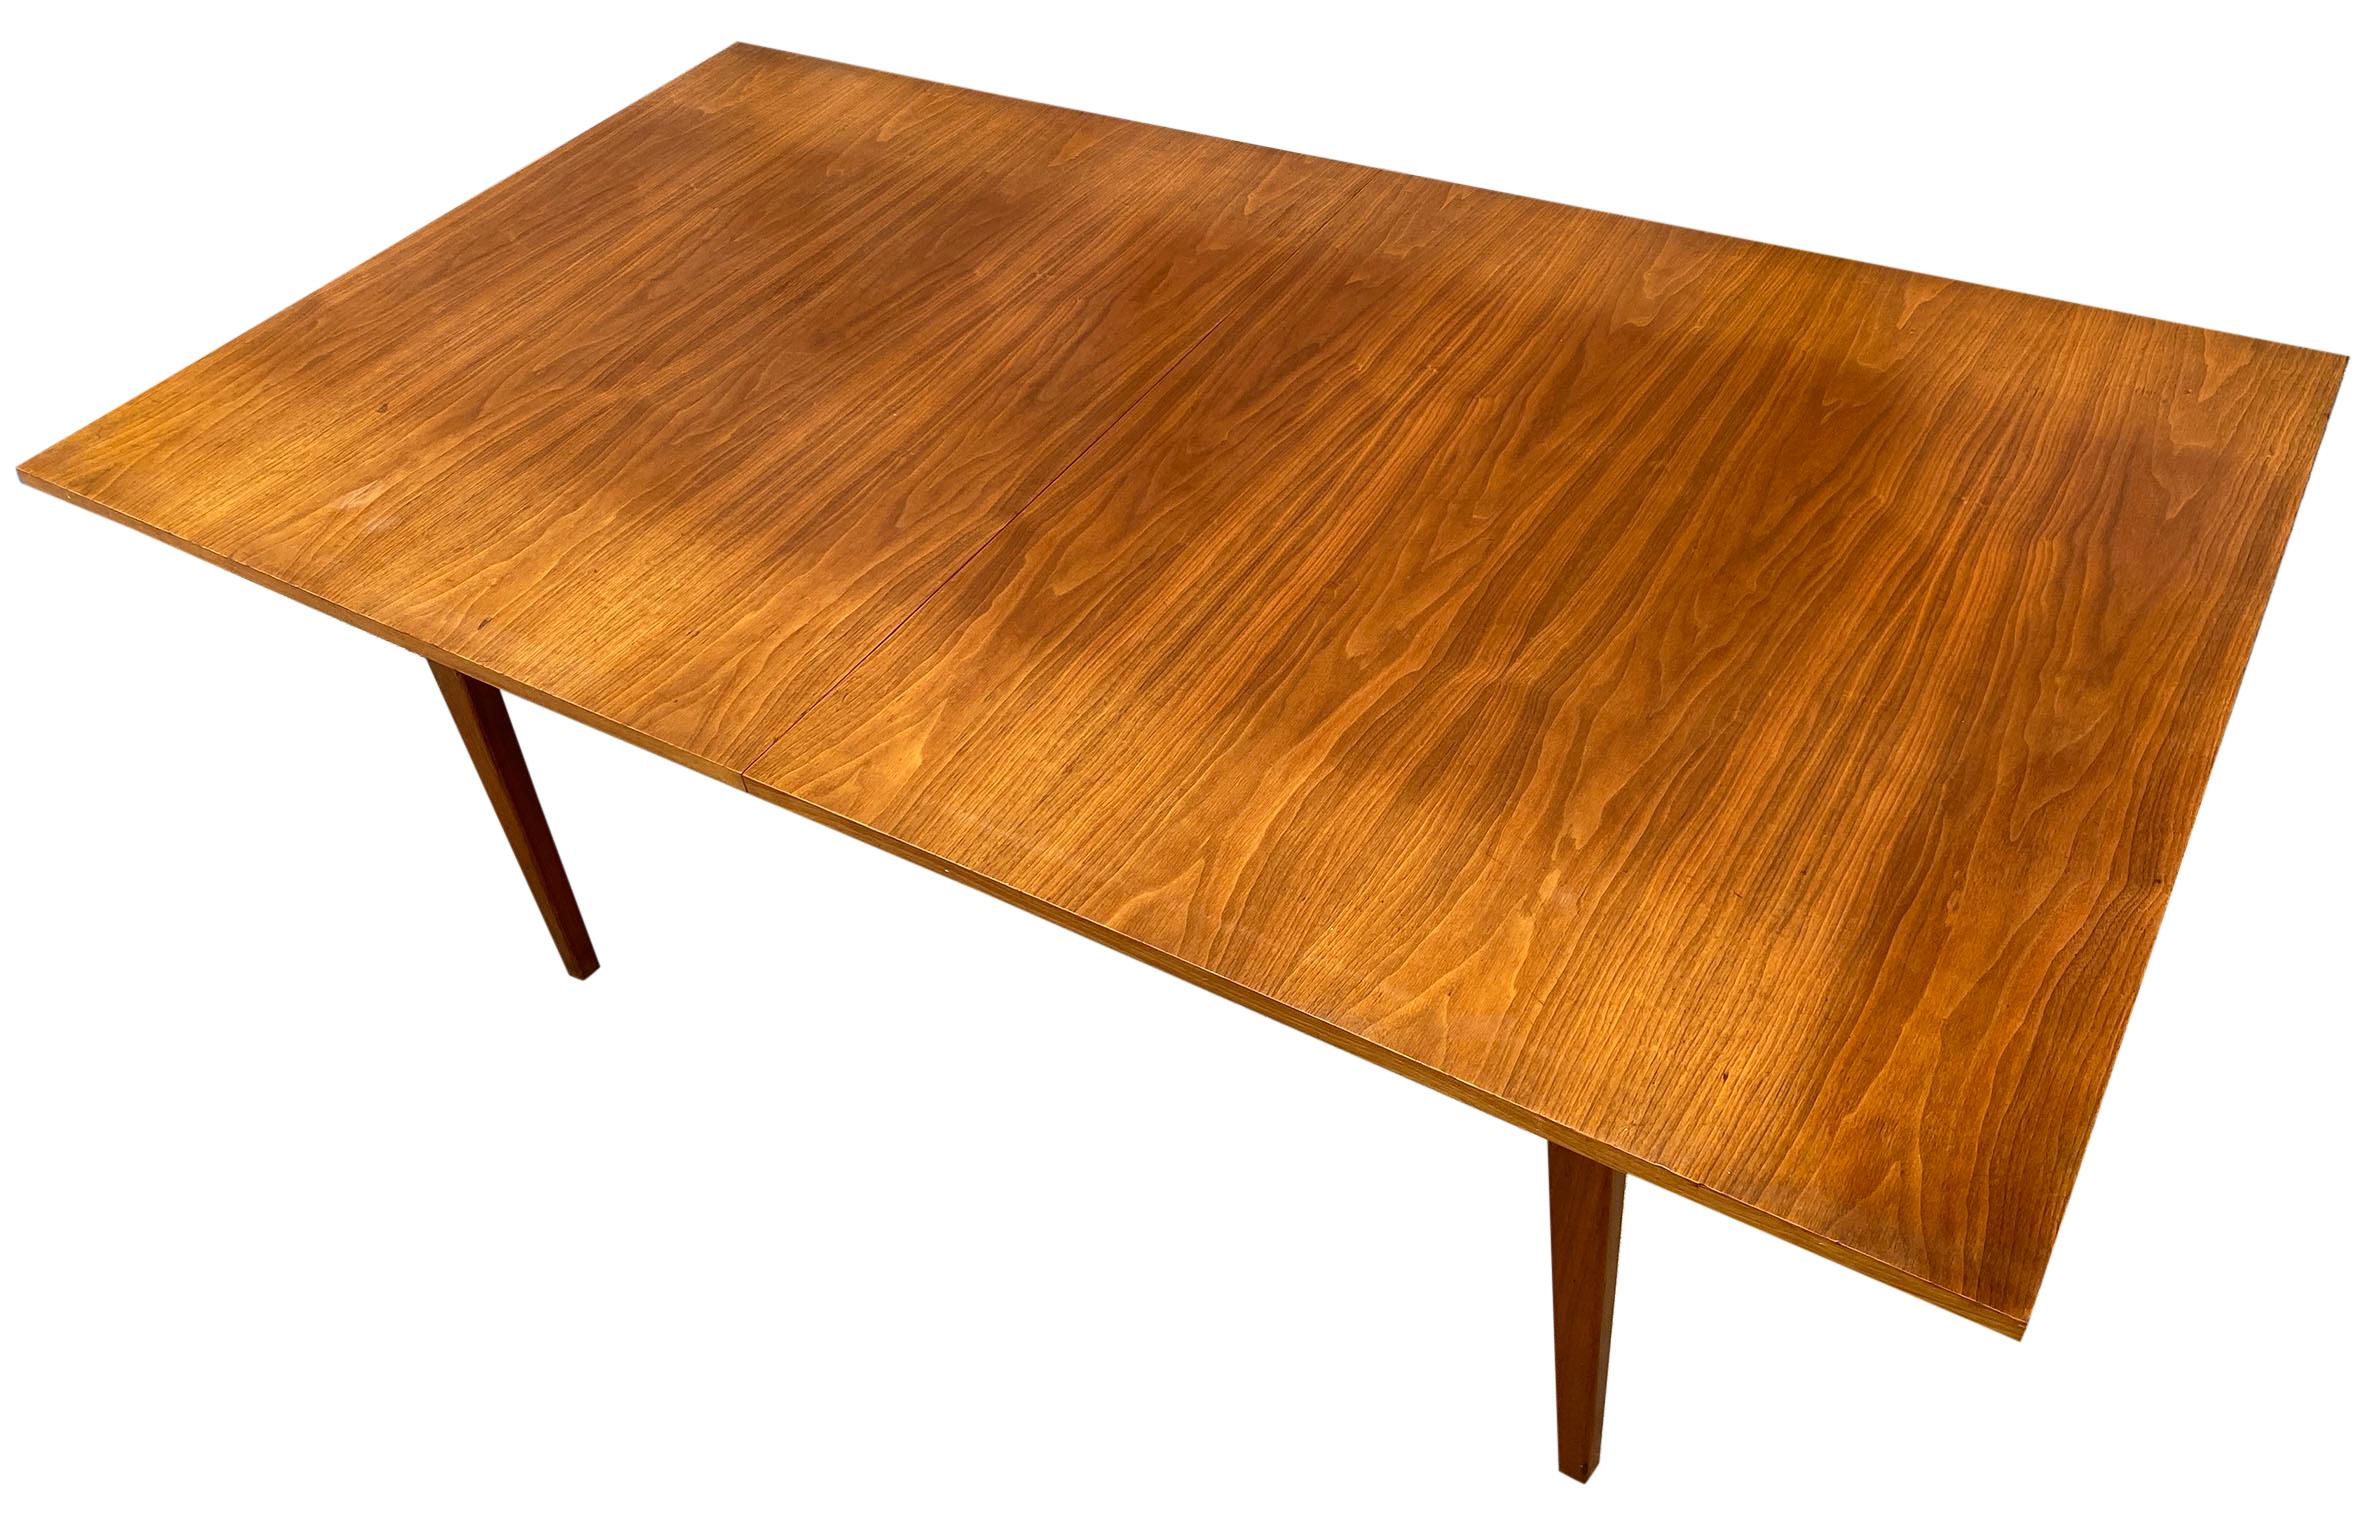 Mid-Century Modern American George Nelson for Herman Miller dining table. Beautiful wood walnut veneer table top. Solid walnut table base and legs. Made circa 1960 Mfg #5558 stamped on underside. Original finish in good vintage condition has slight